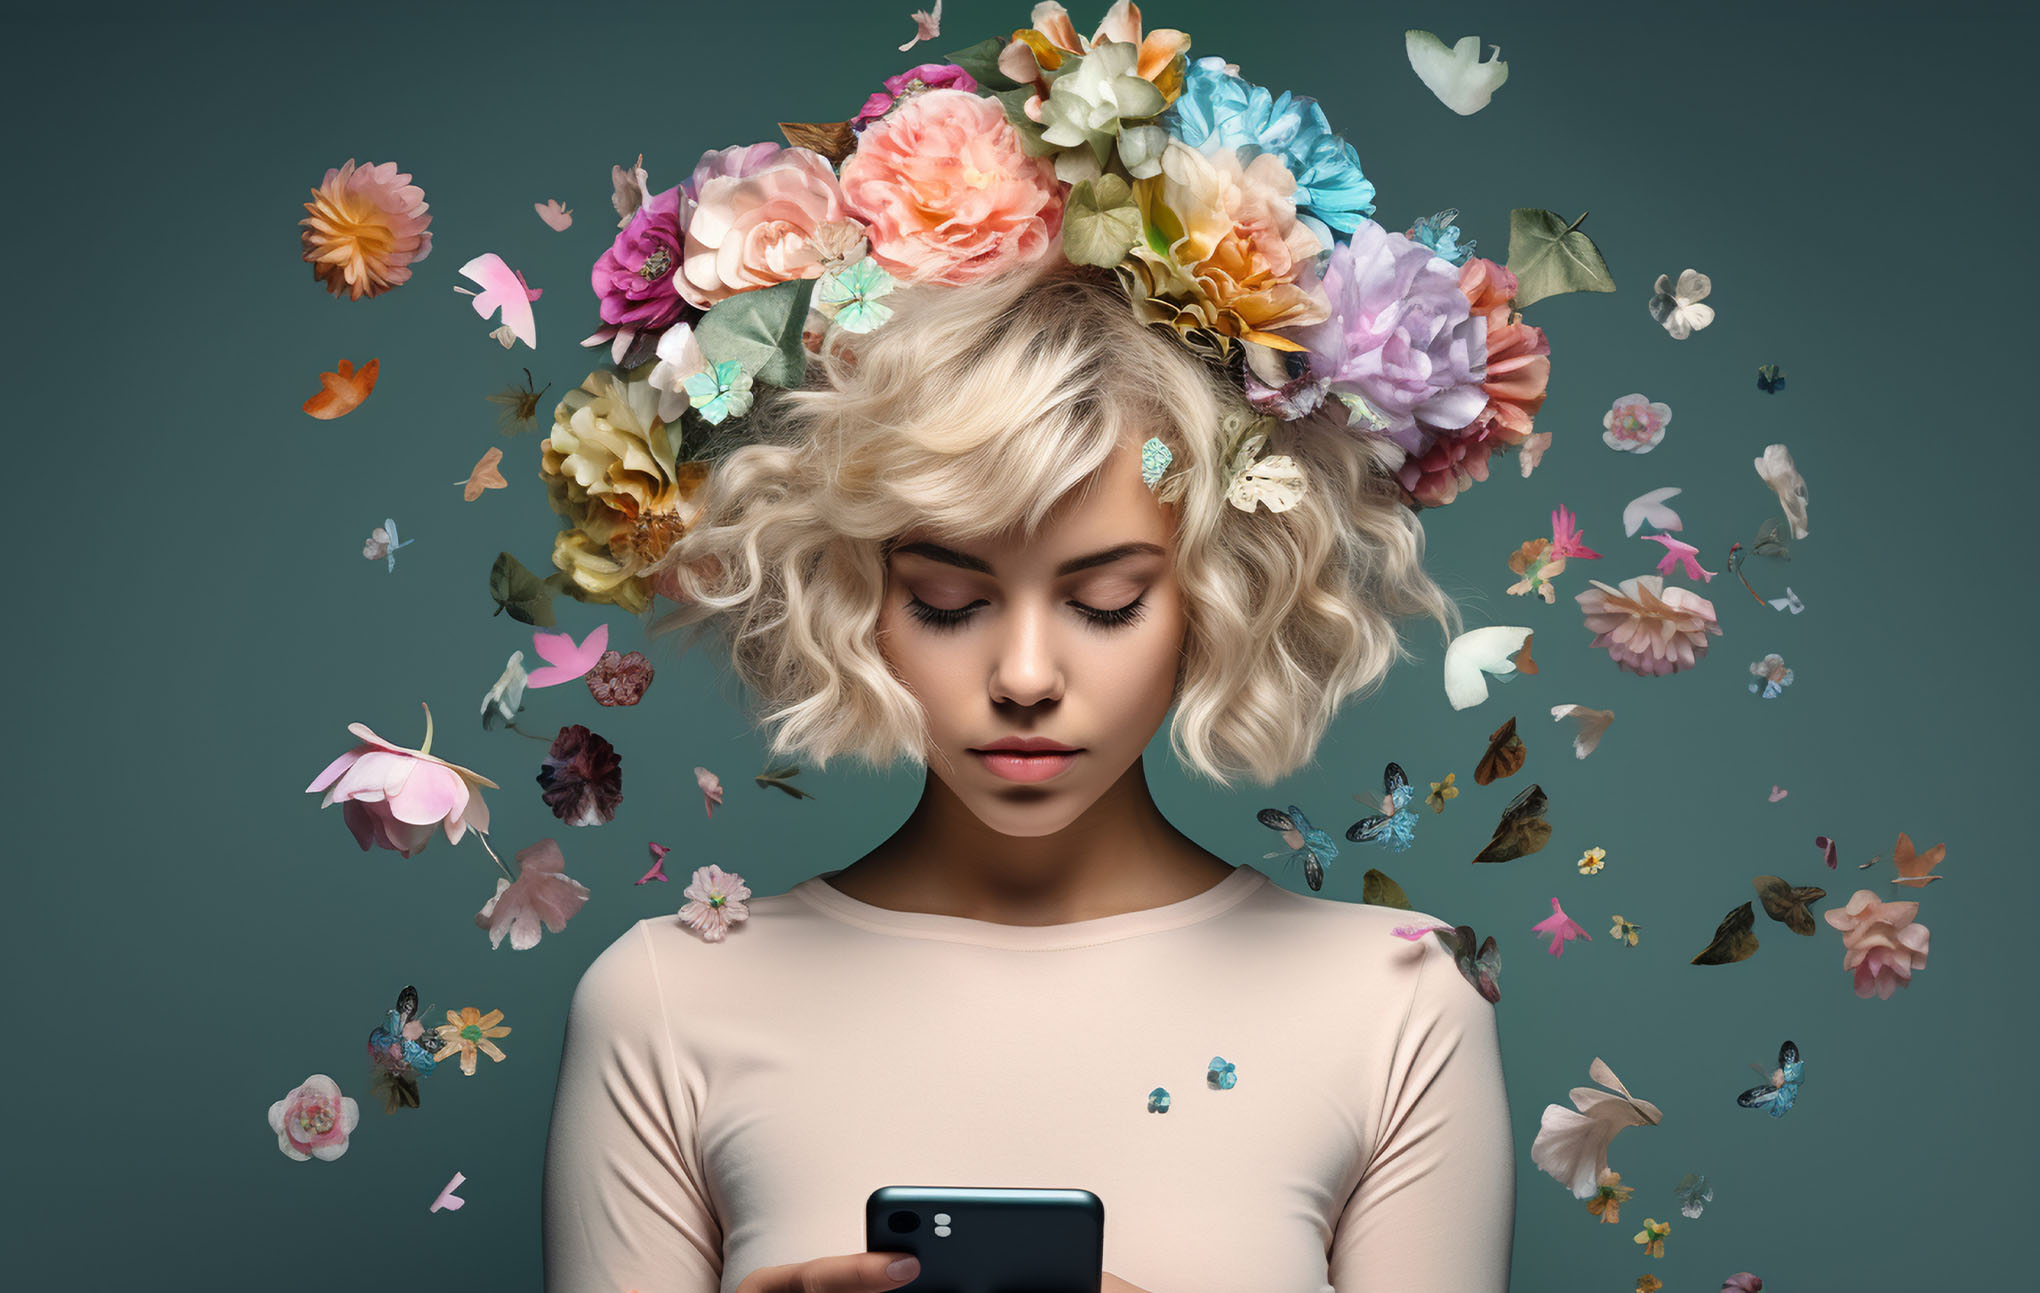 A young woman with curly blonde hair adorned with a colorful array of flowers on her head looks at her smartphone, surrounded by a flurry of loose petals and flowers against a teal background.